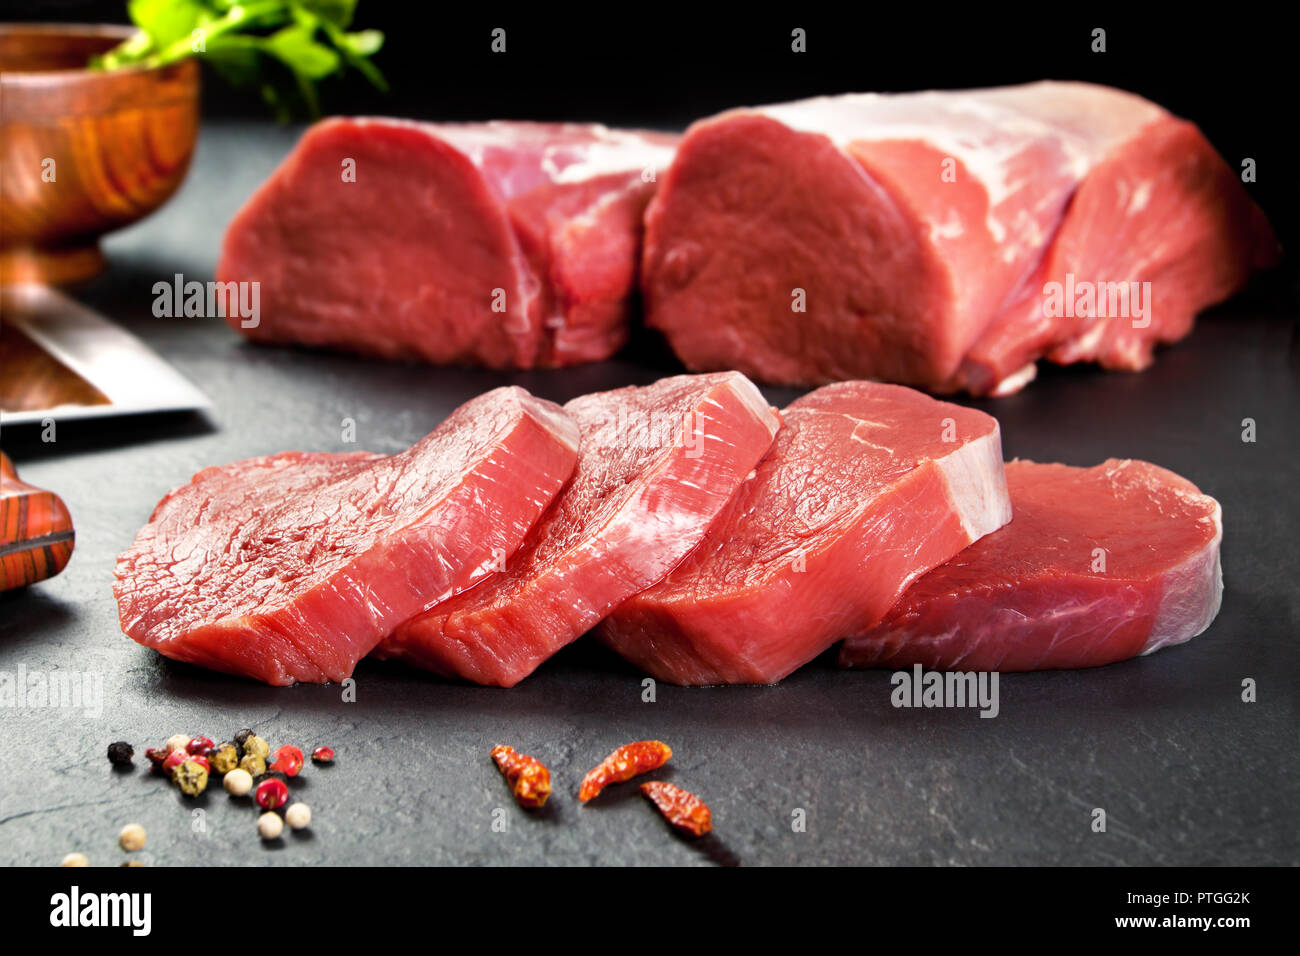 Fresh and raw meat Sirloin medallions steak fillets ready to cook. Stock Photo